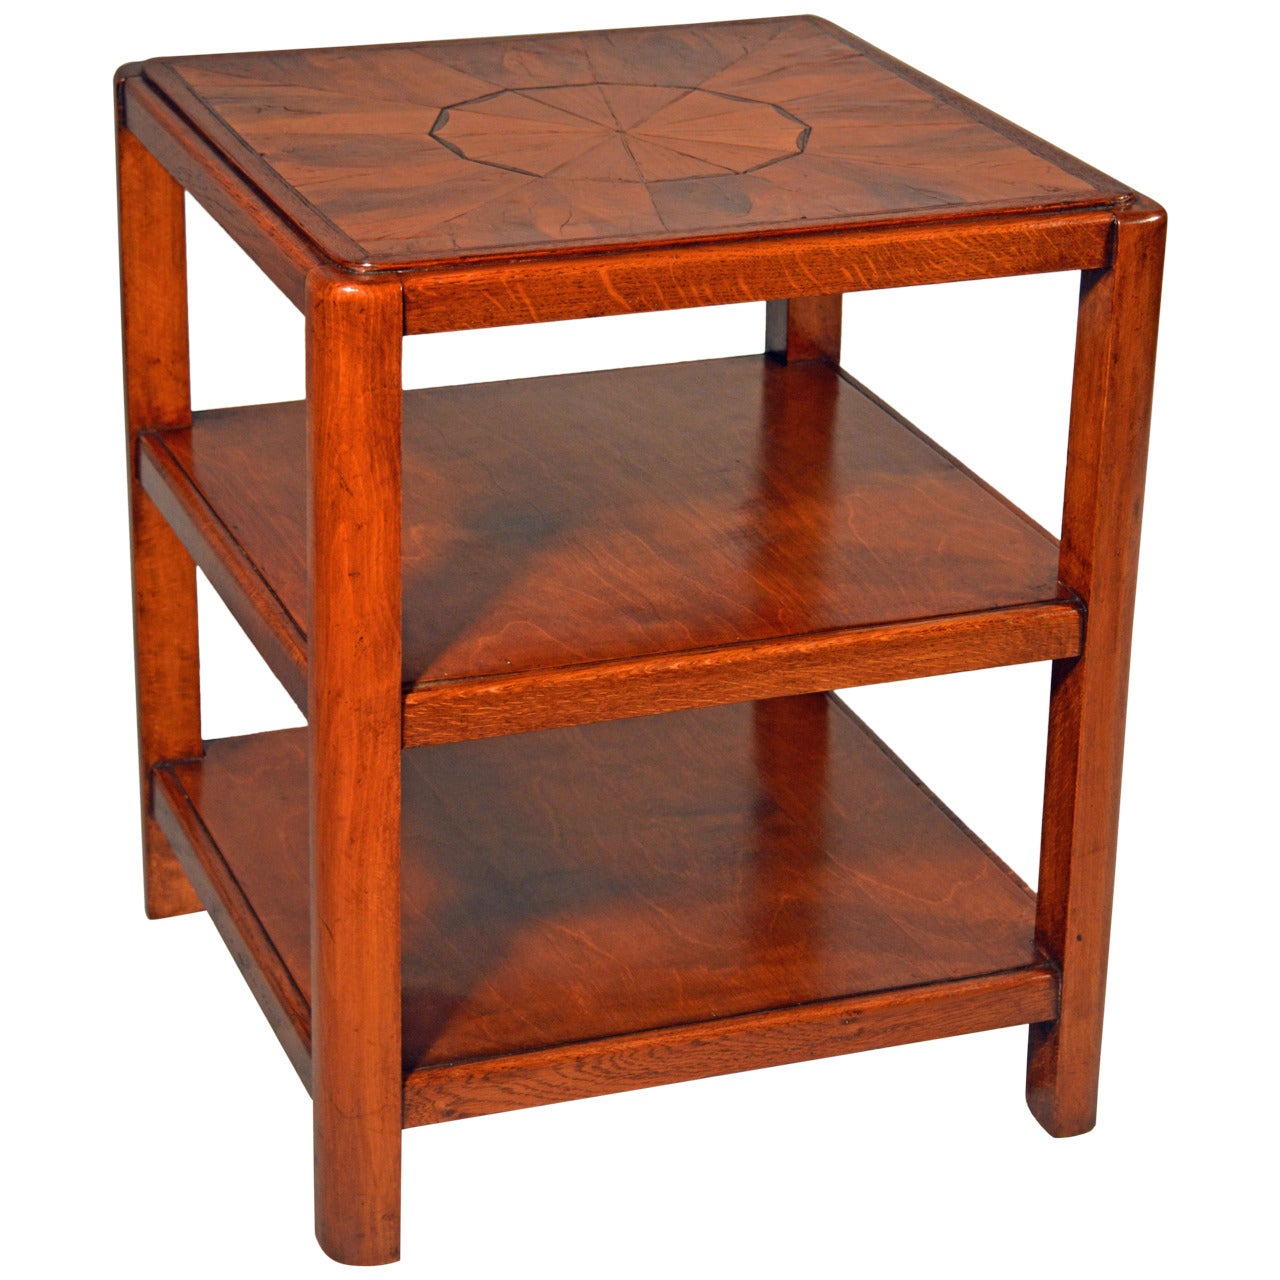 An early 20th century art deco etagere end table